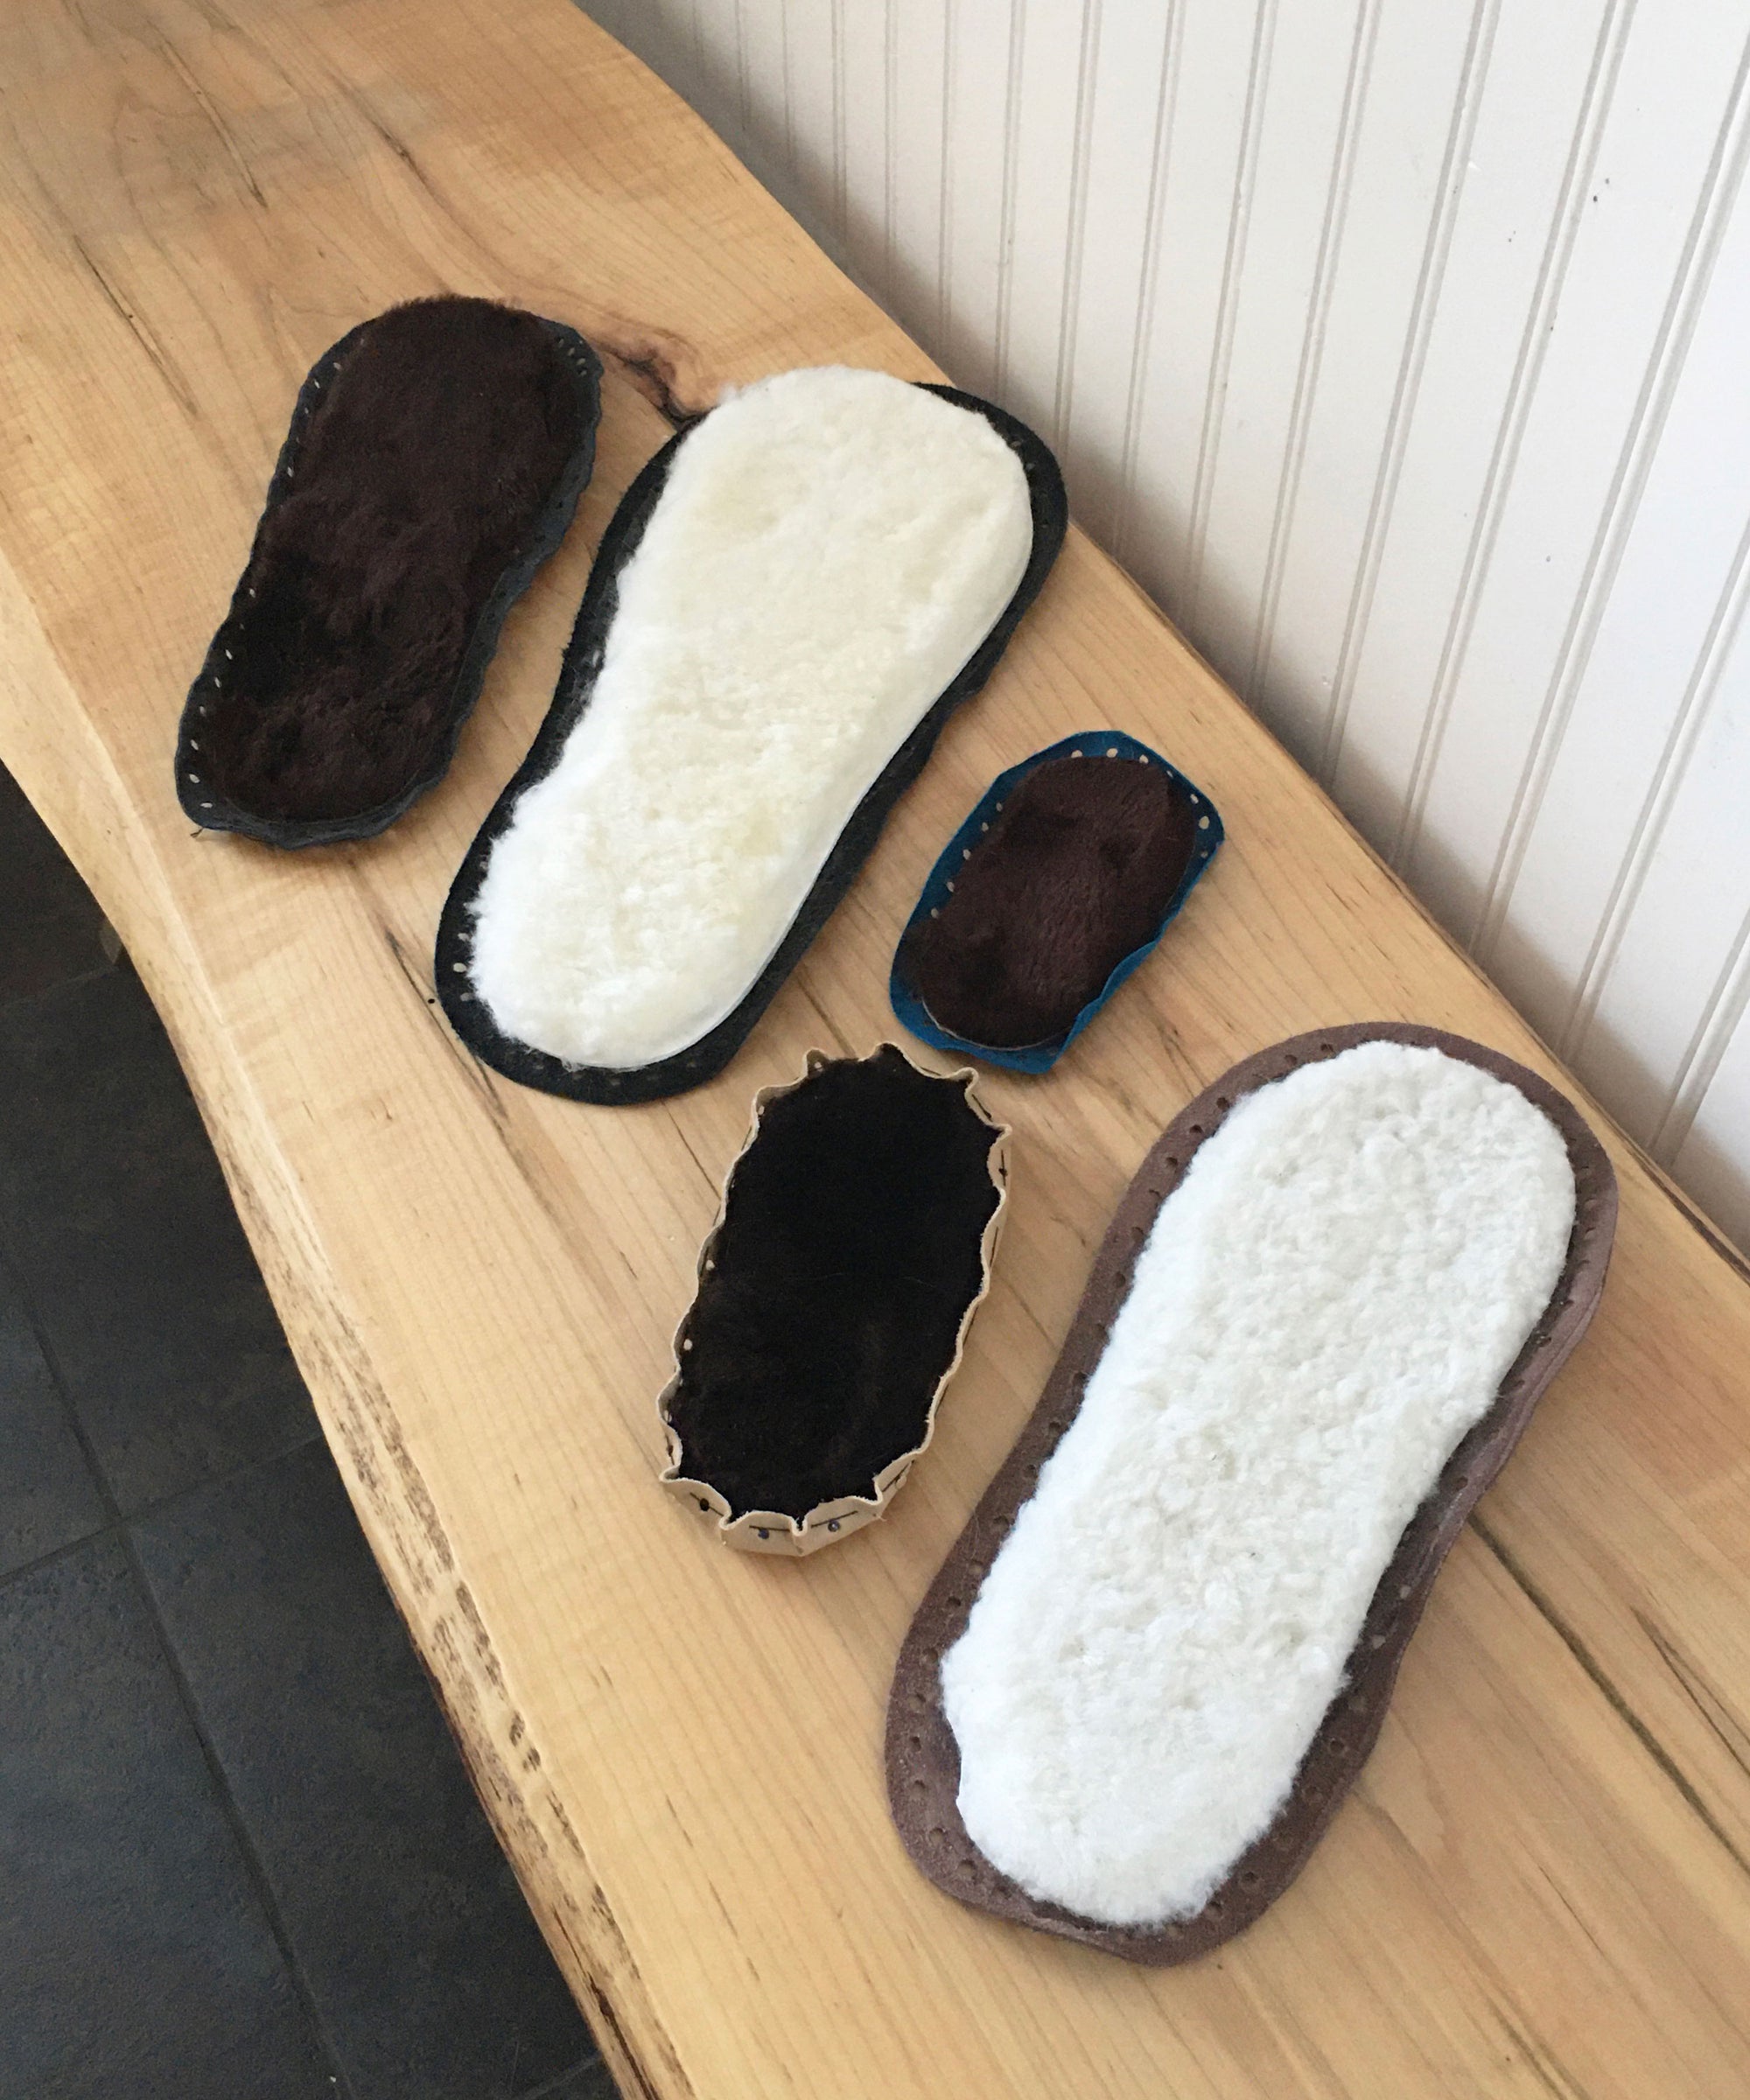 Classic Slipper: The Business, Black Merino Wool Slippers with Leather Soles